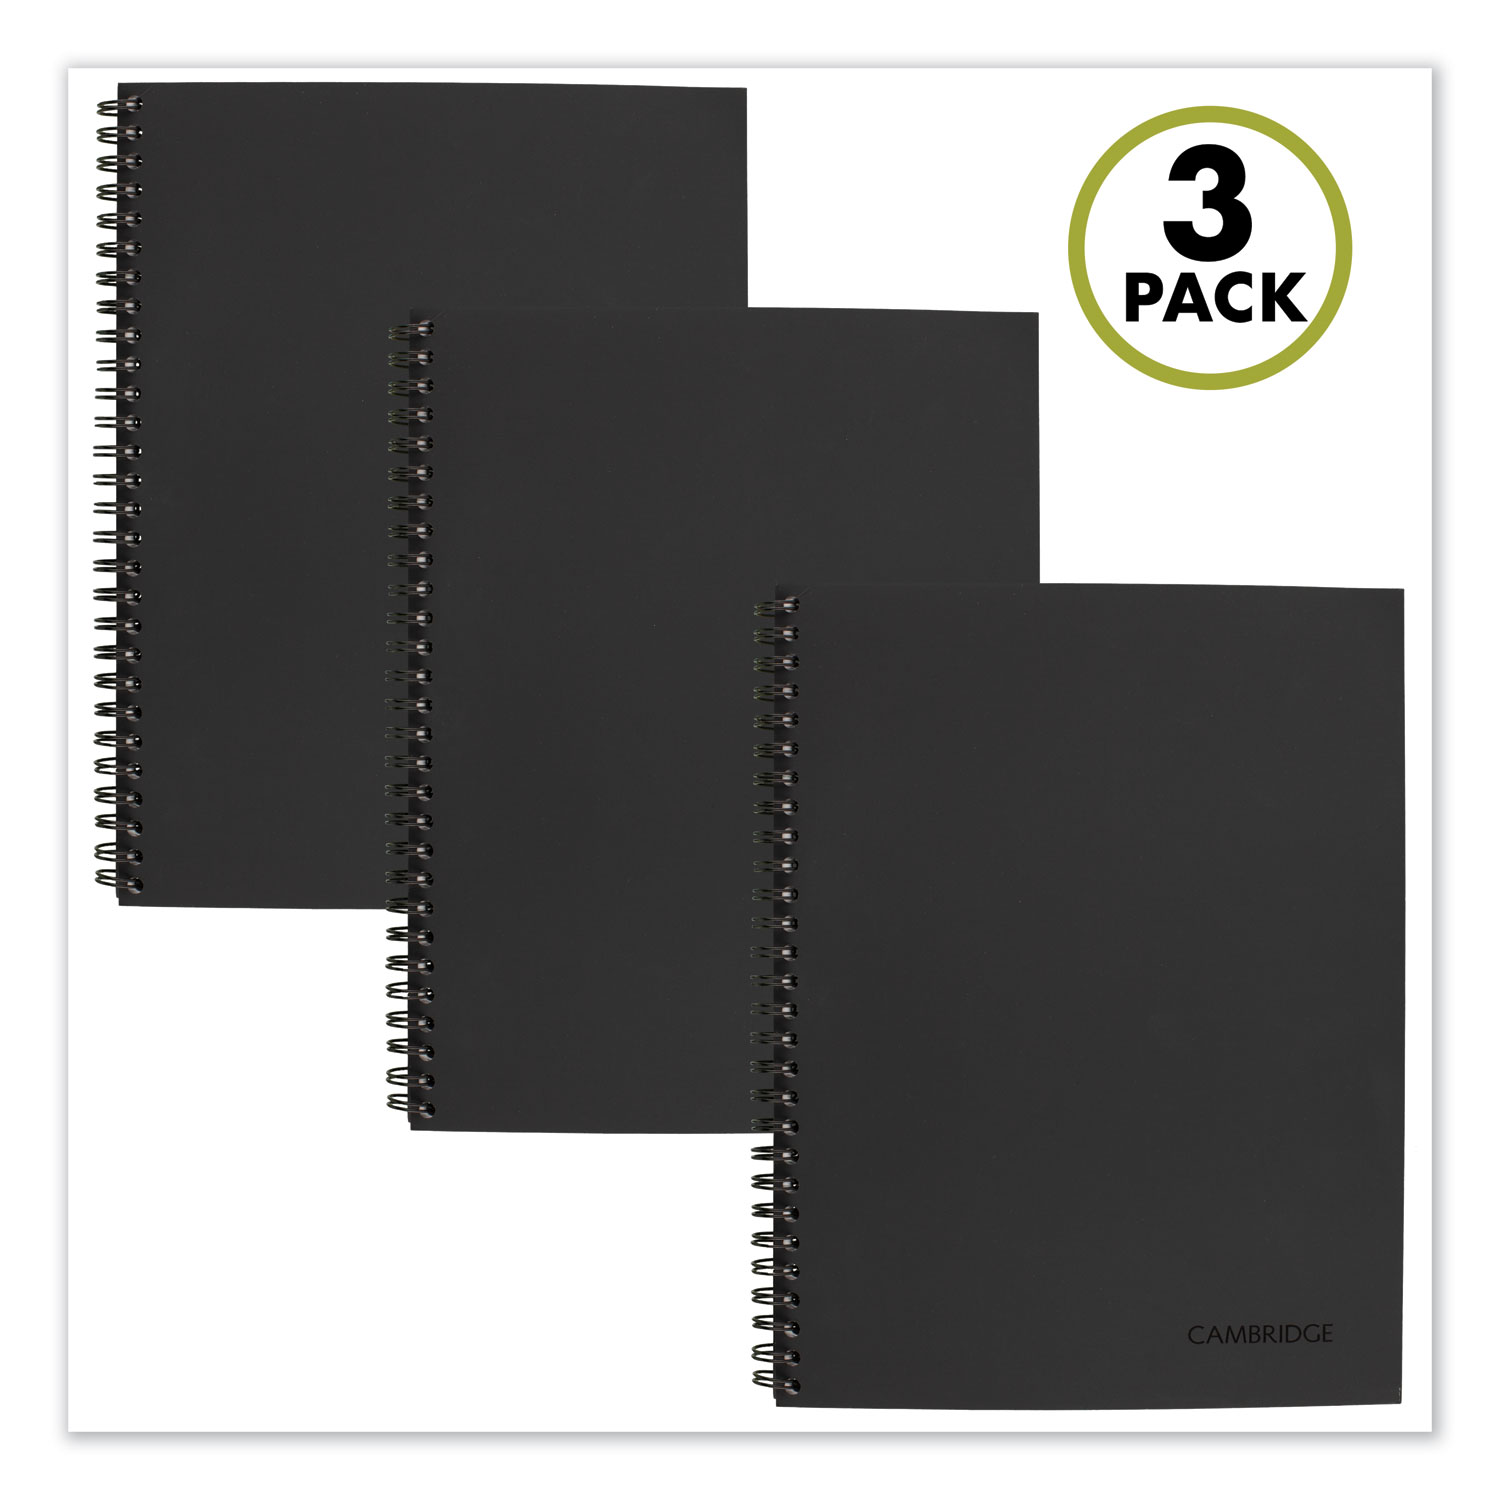  Cambridge 4501601 Wirebound Action Planner Notebook Plus Pack, Black, 9.5 x 7.25, 80 Sheets, 3/Pack (MEA45016) 